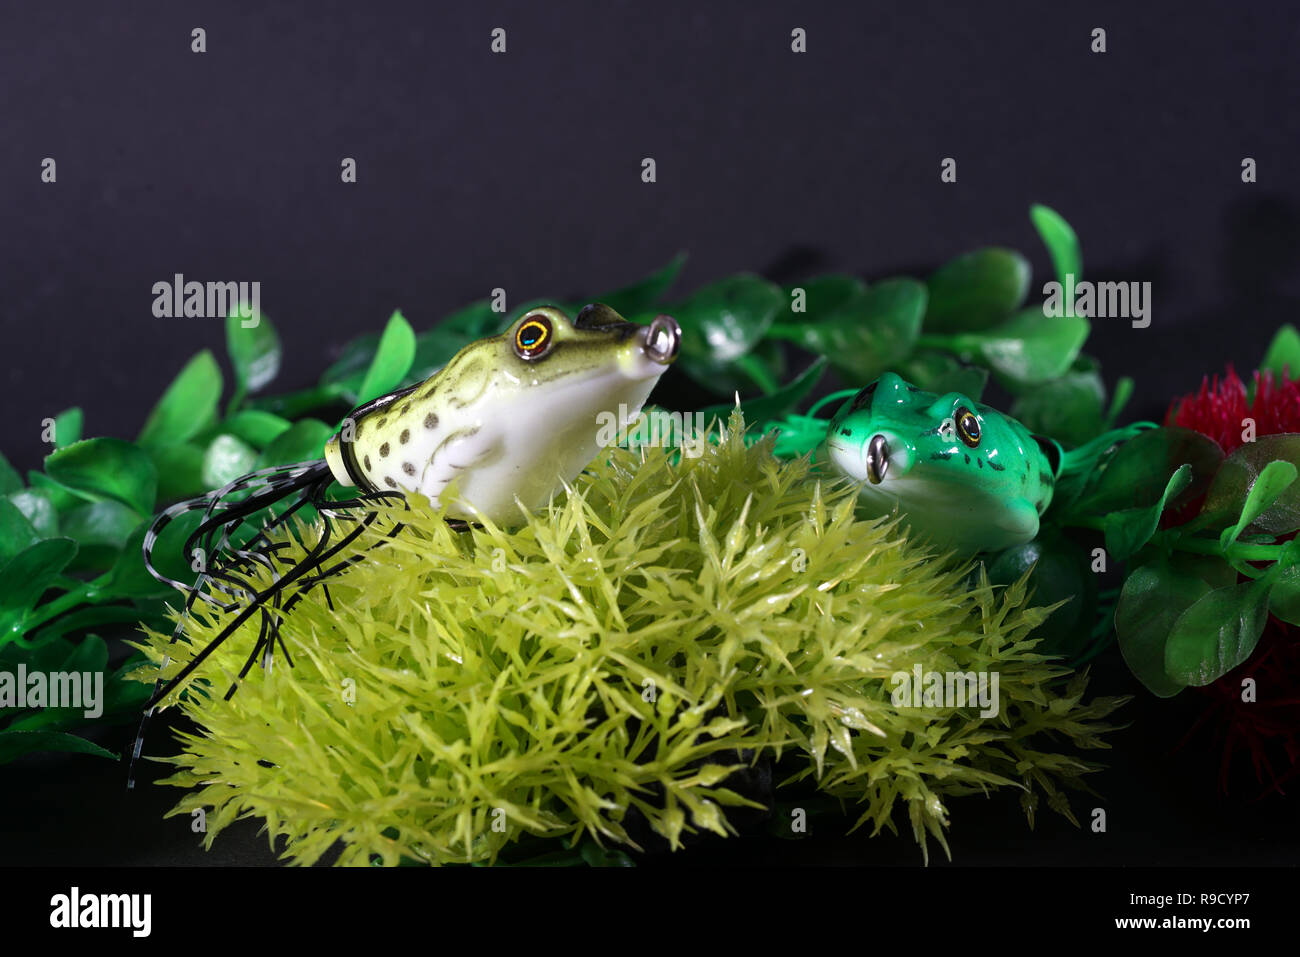 https://c8.alamy.com/comp/R9CYP7/frogs-made-of-plastic-with-sharp-hooks-are-well-suited-as-artificial-baits-on-predatory-fish-R9CYP7.jpg